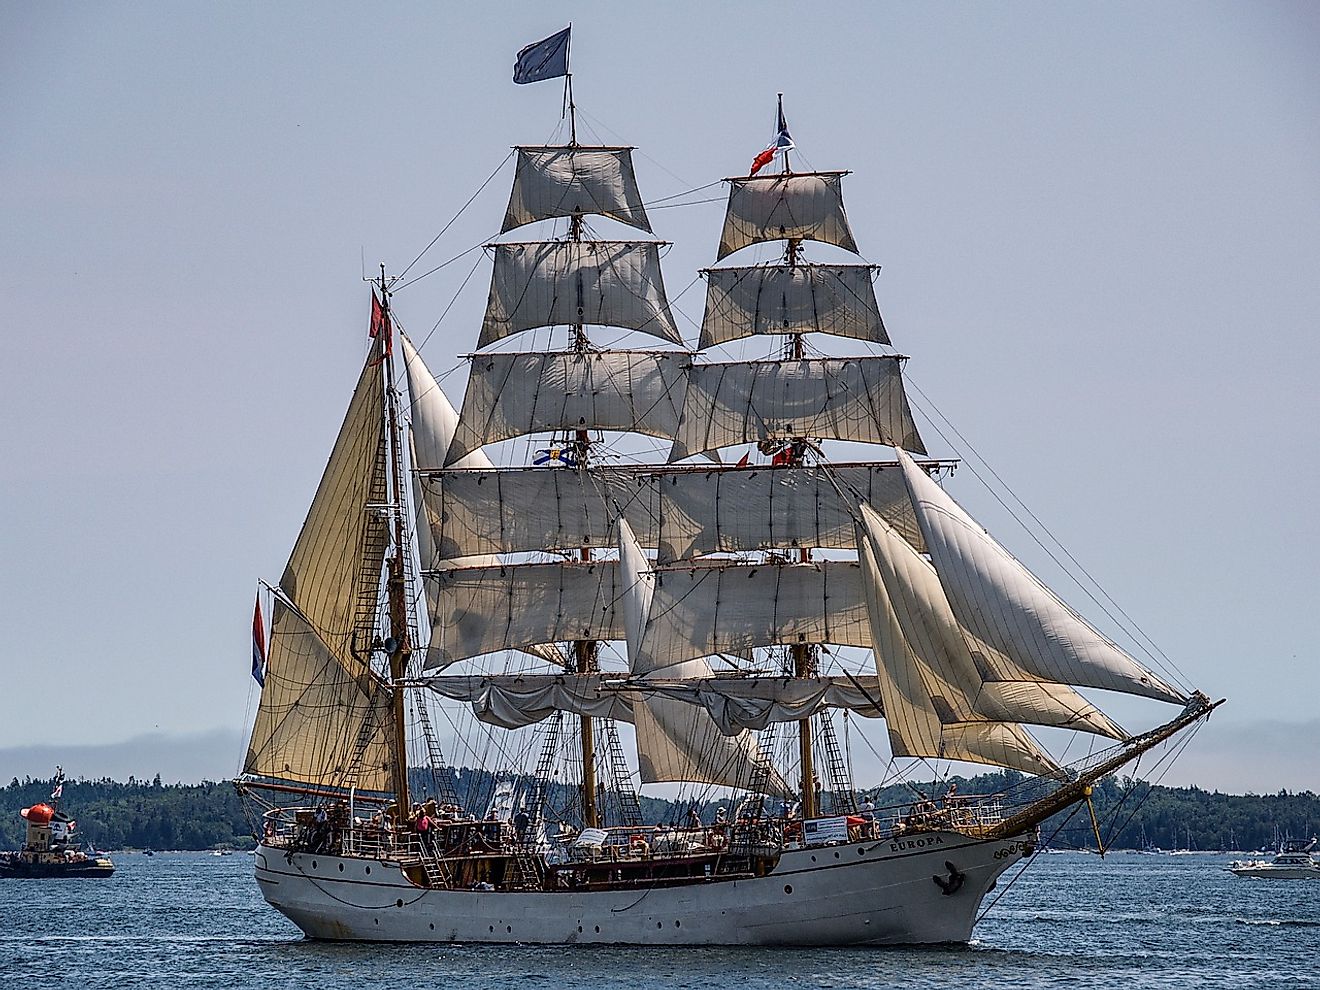 Cruising along the Halifax harbour can be a pleasure activity for the aged people. Image credit: Wayne Linton from Pixabay